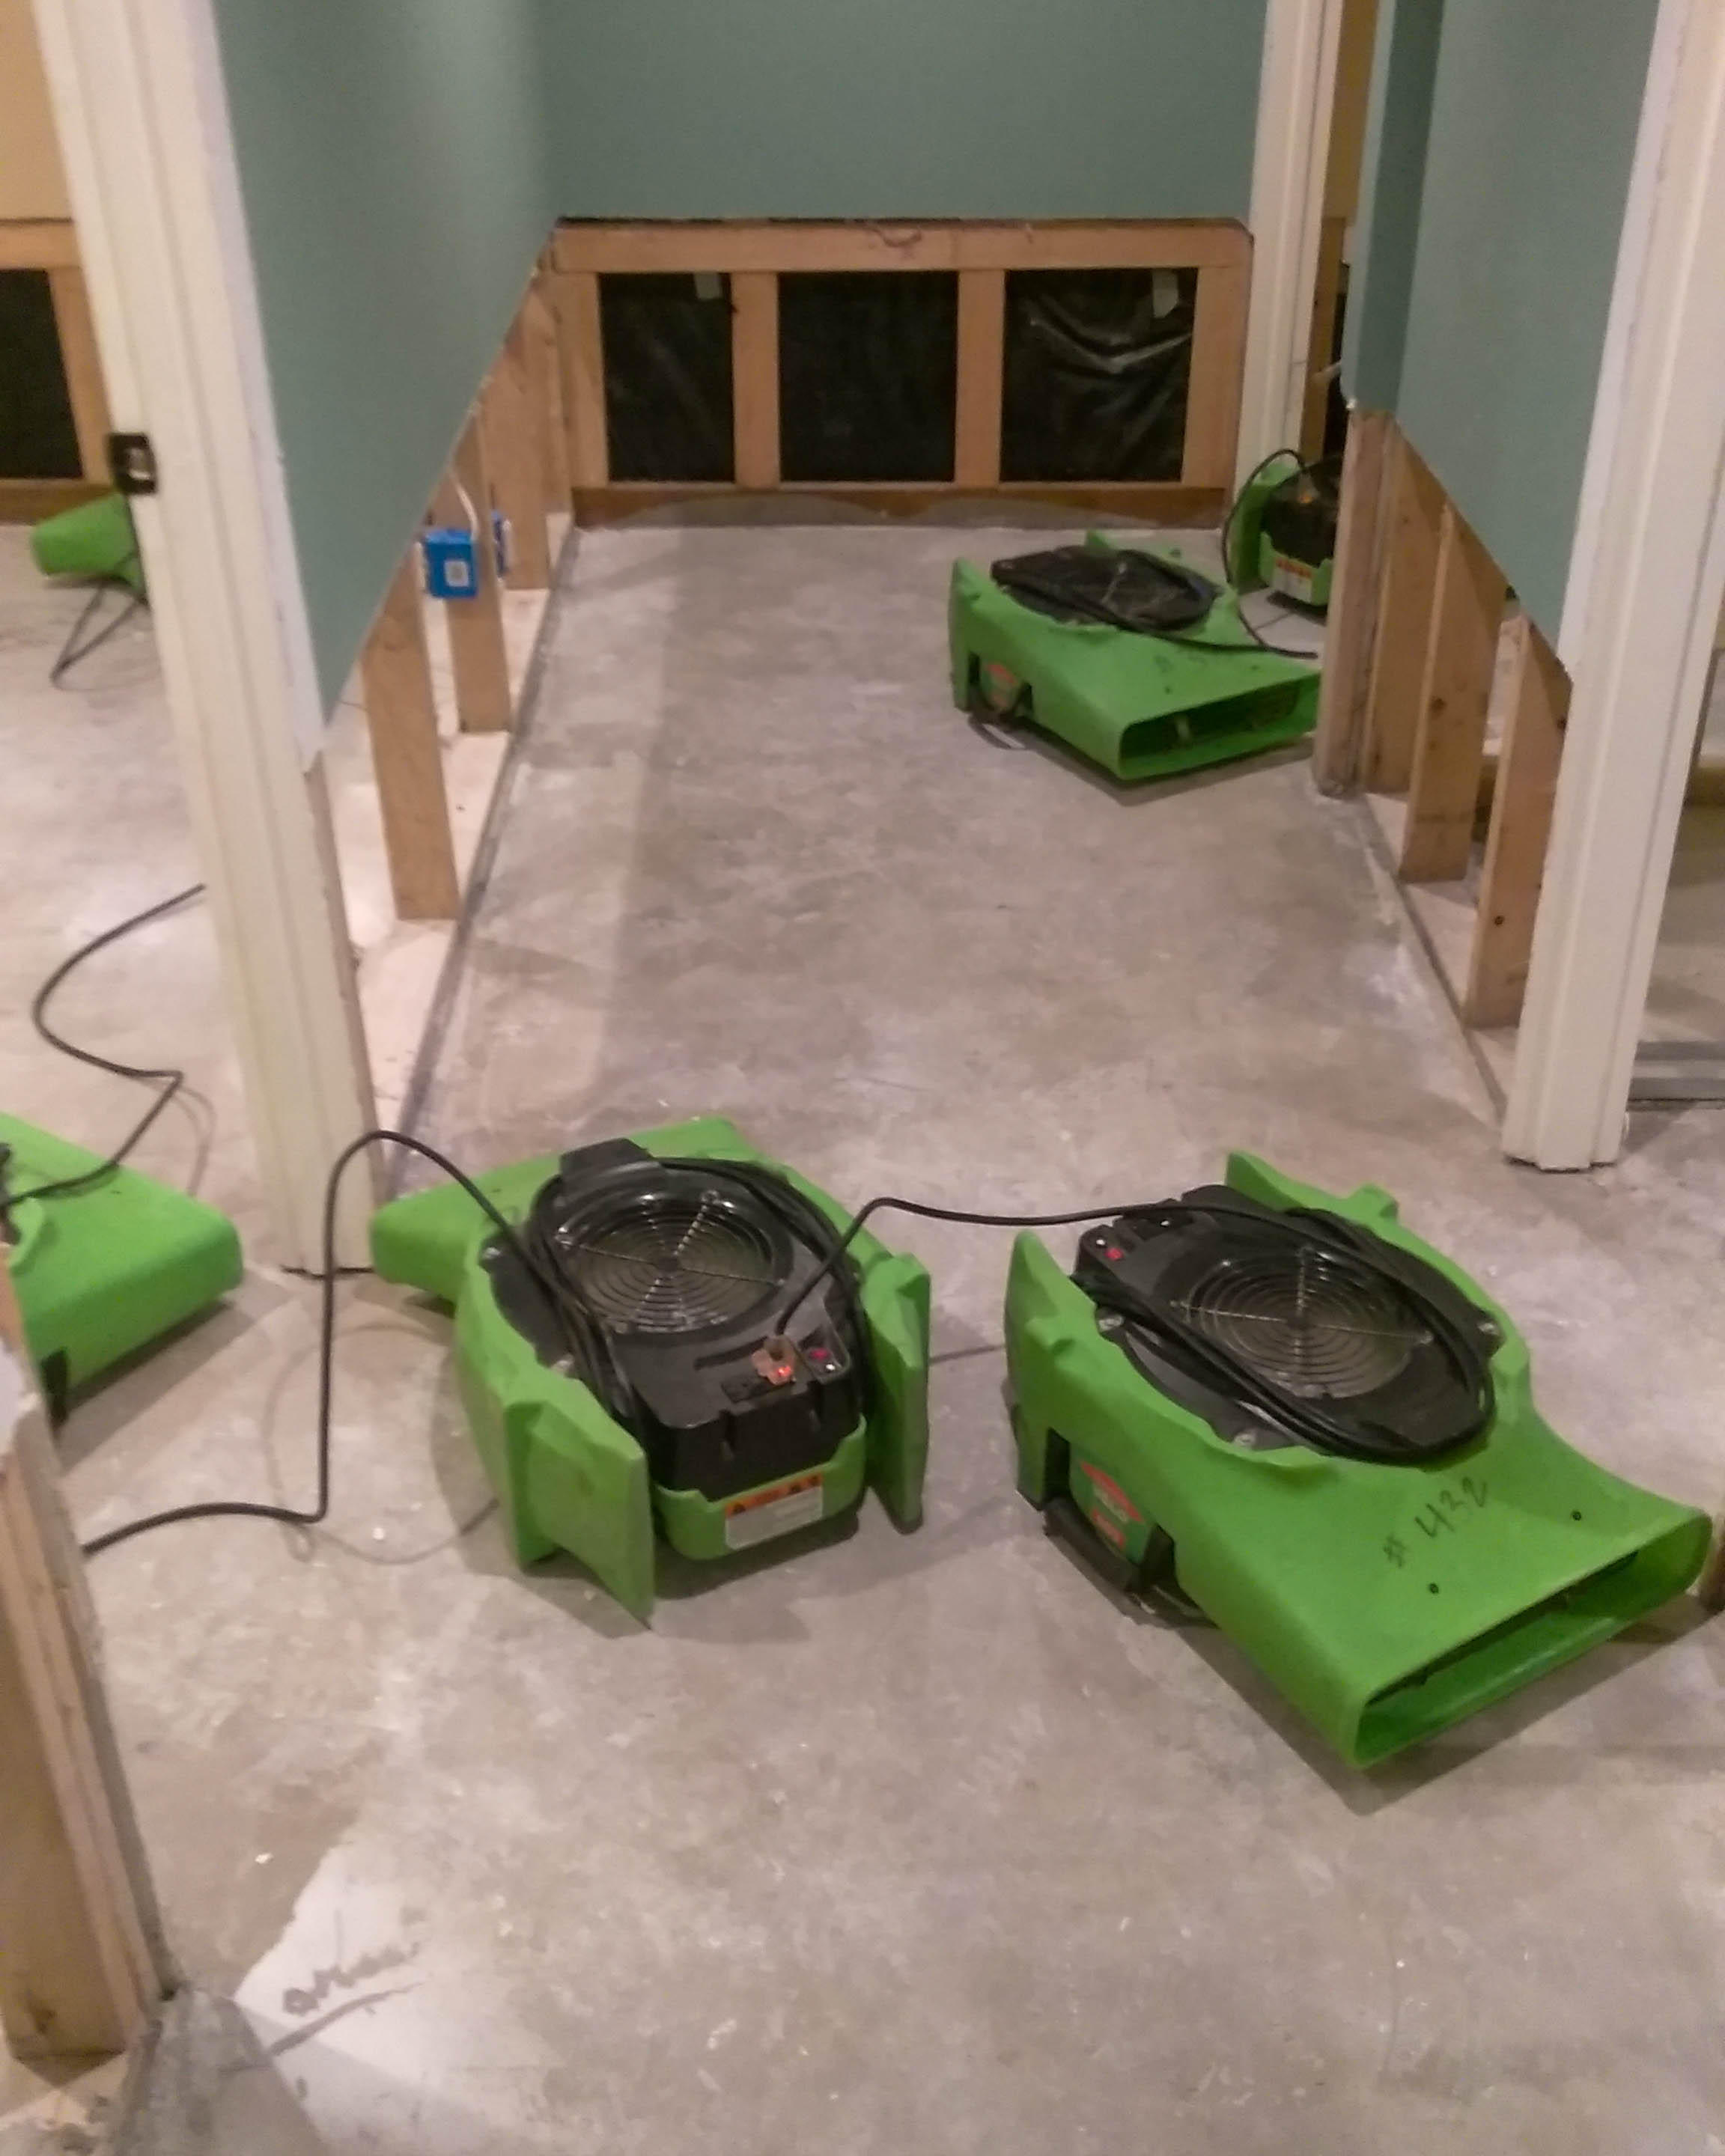 SERVPRO of Issaquah/North Bend is ready for your call! We are happy to help with any and all water damage jobs you can throw our way.